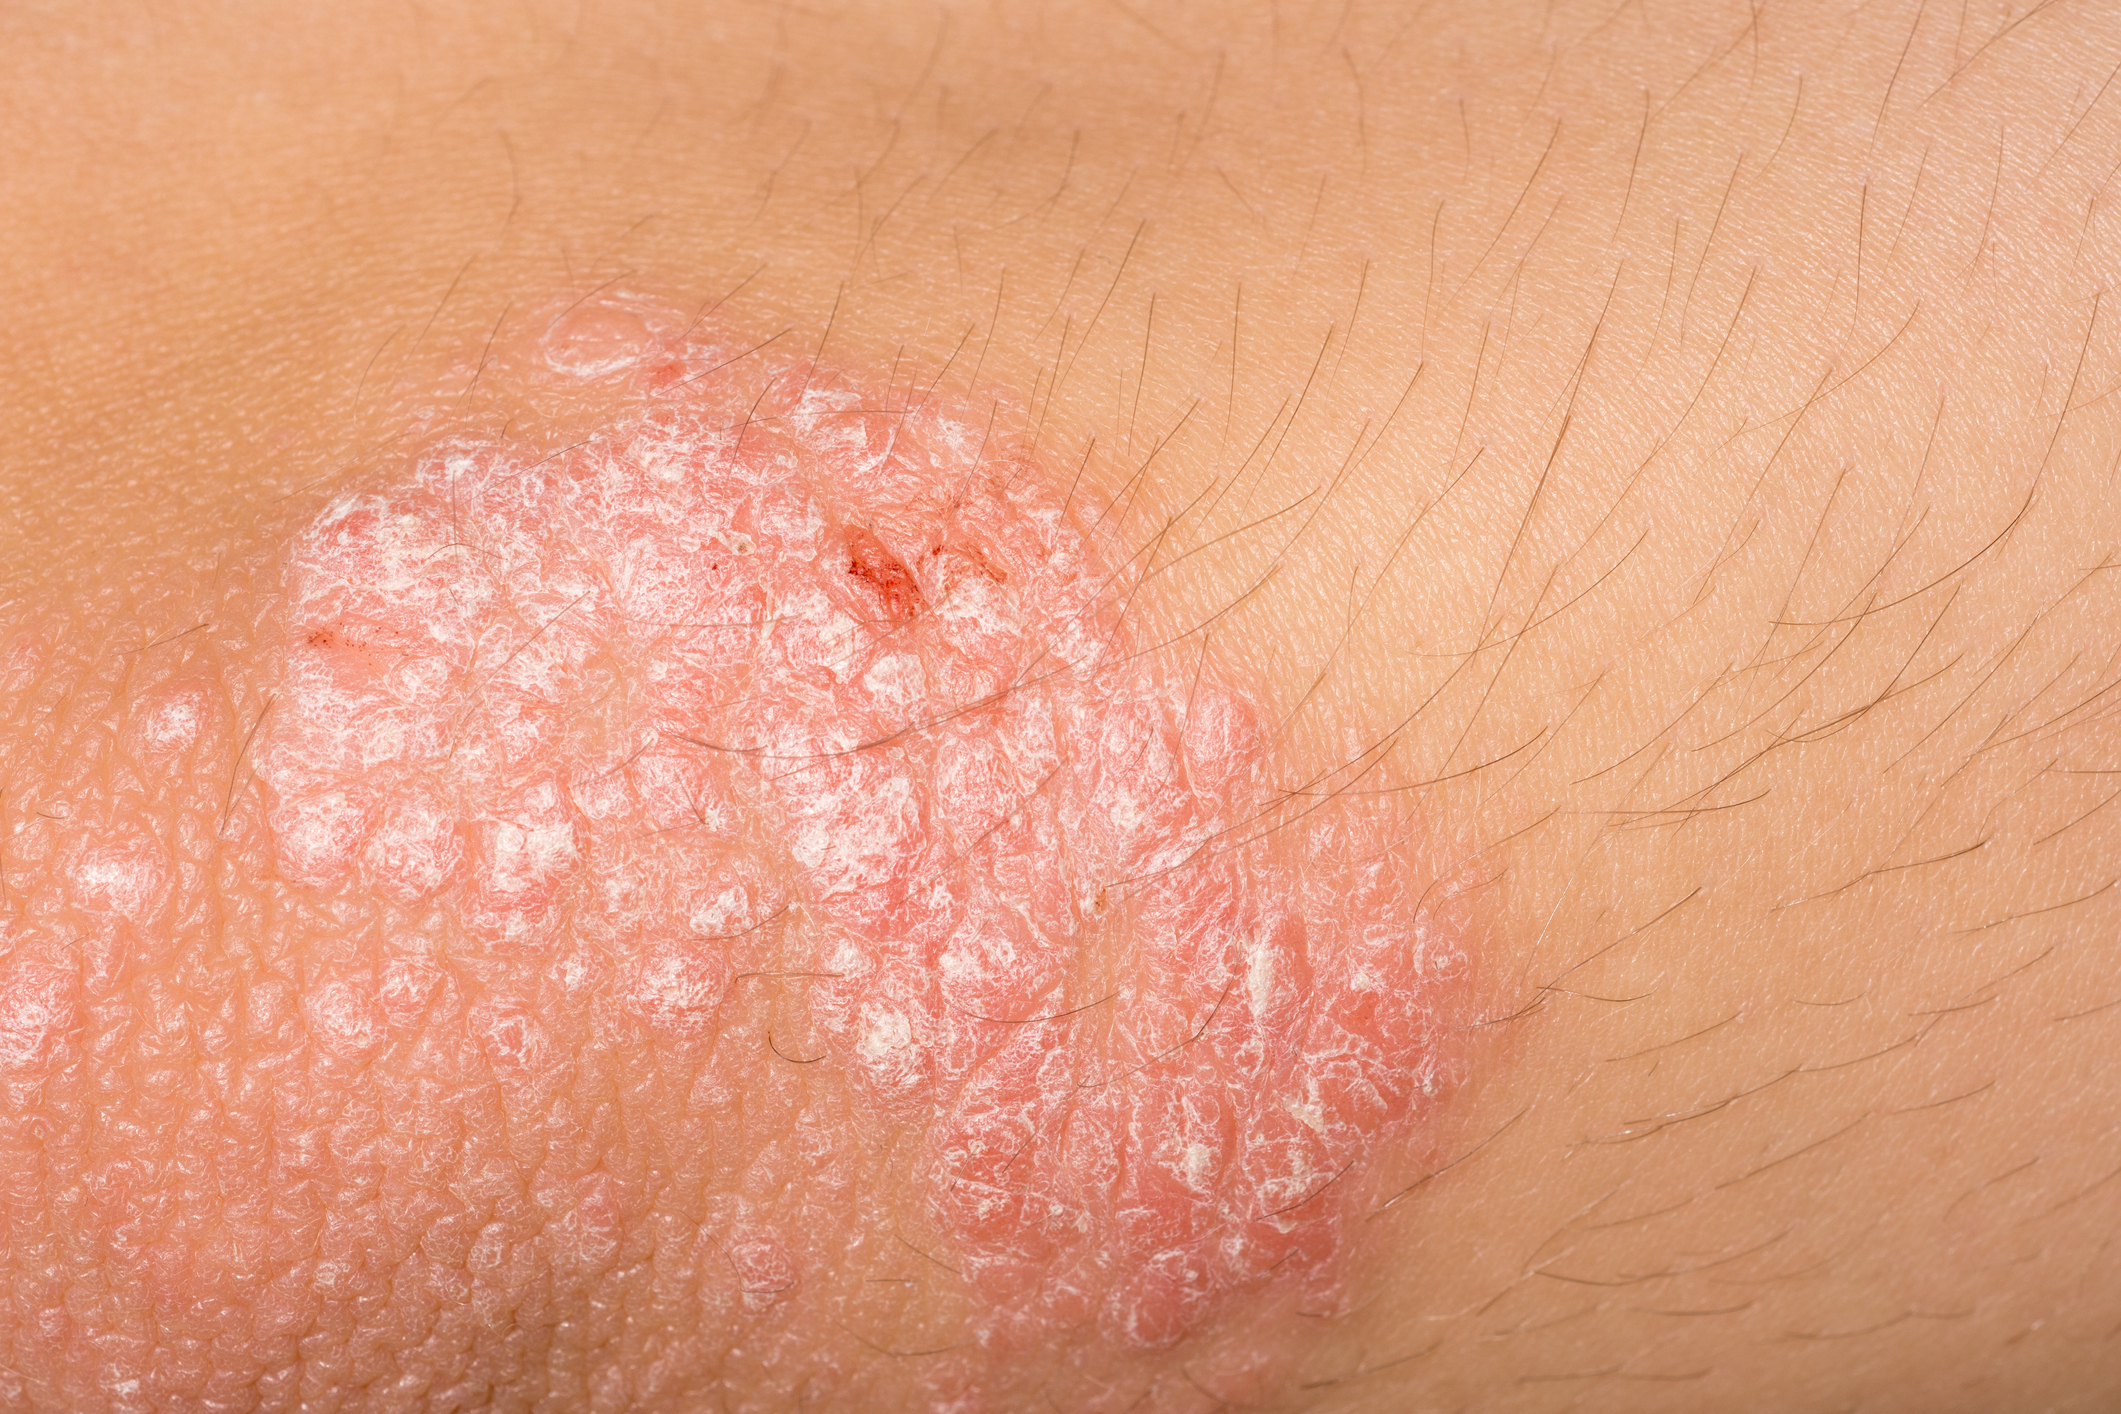 does psoriasis go away completely